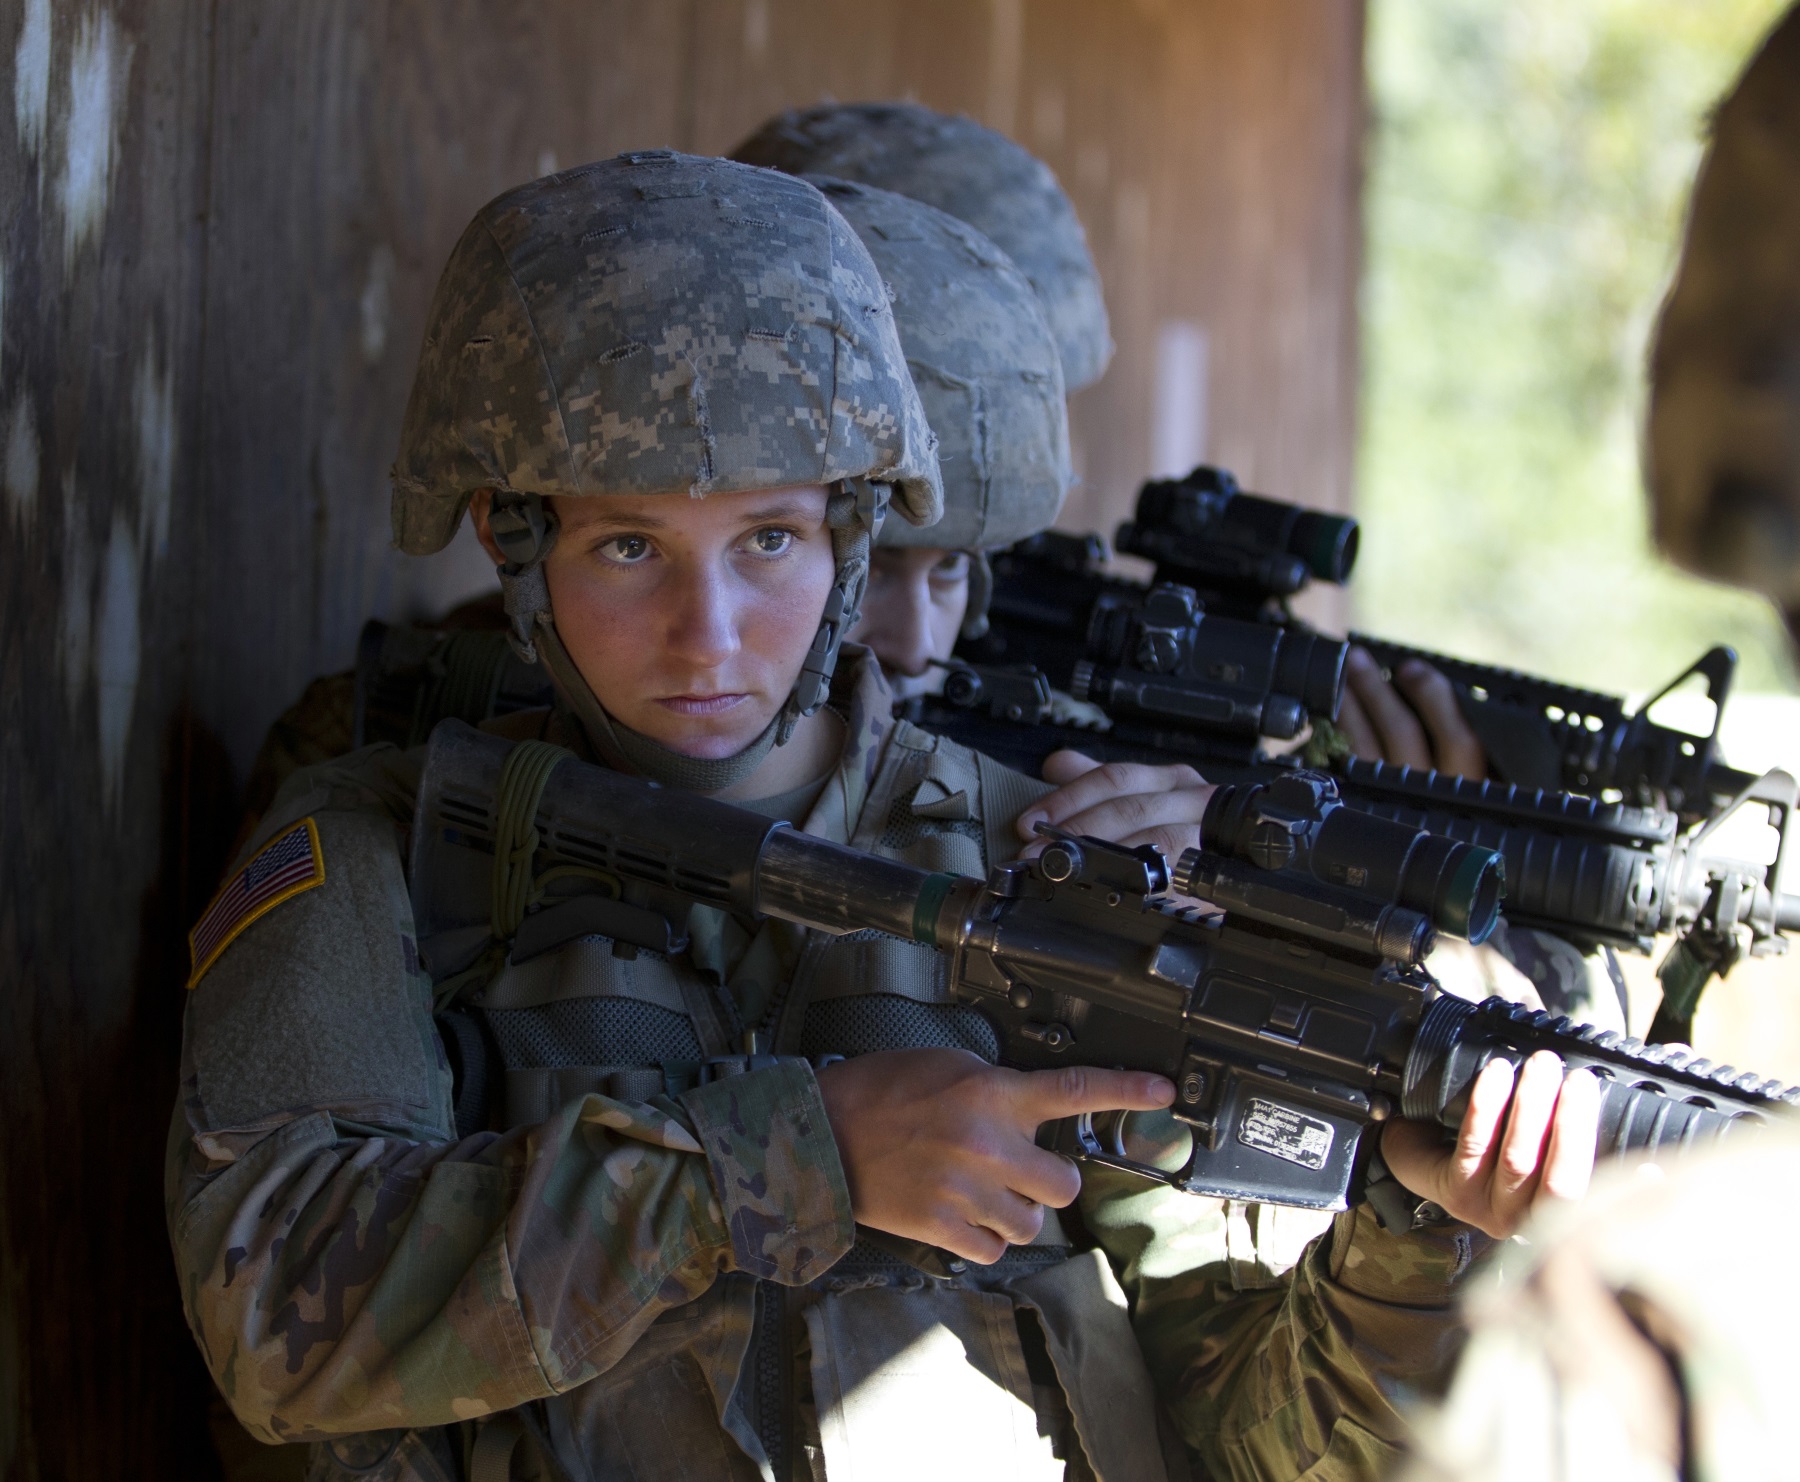 Female Soldiers Are Getting New Body Armor Designed Just For Them : NPR